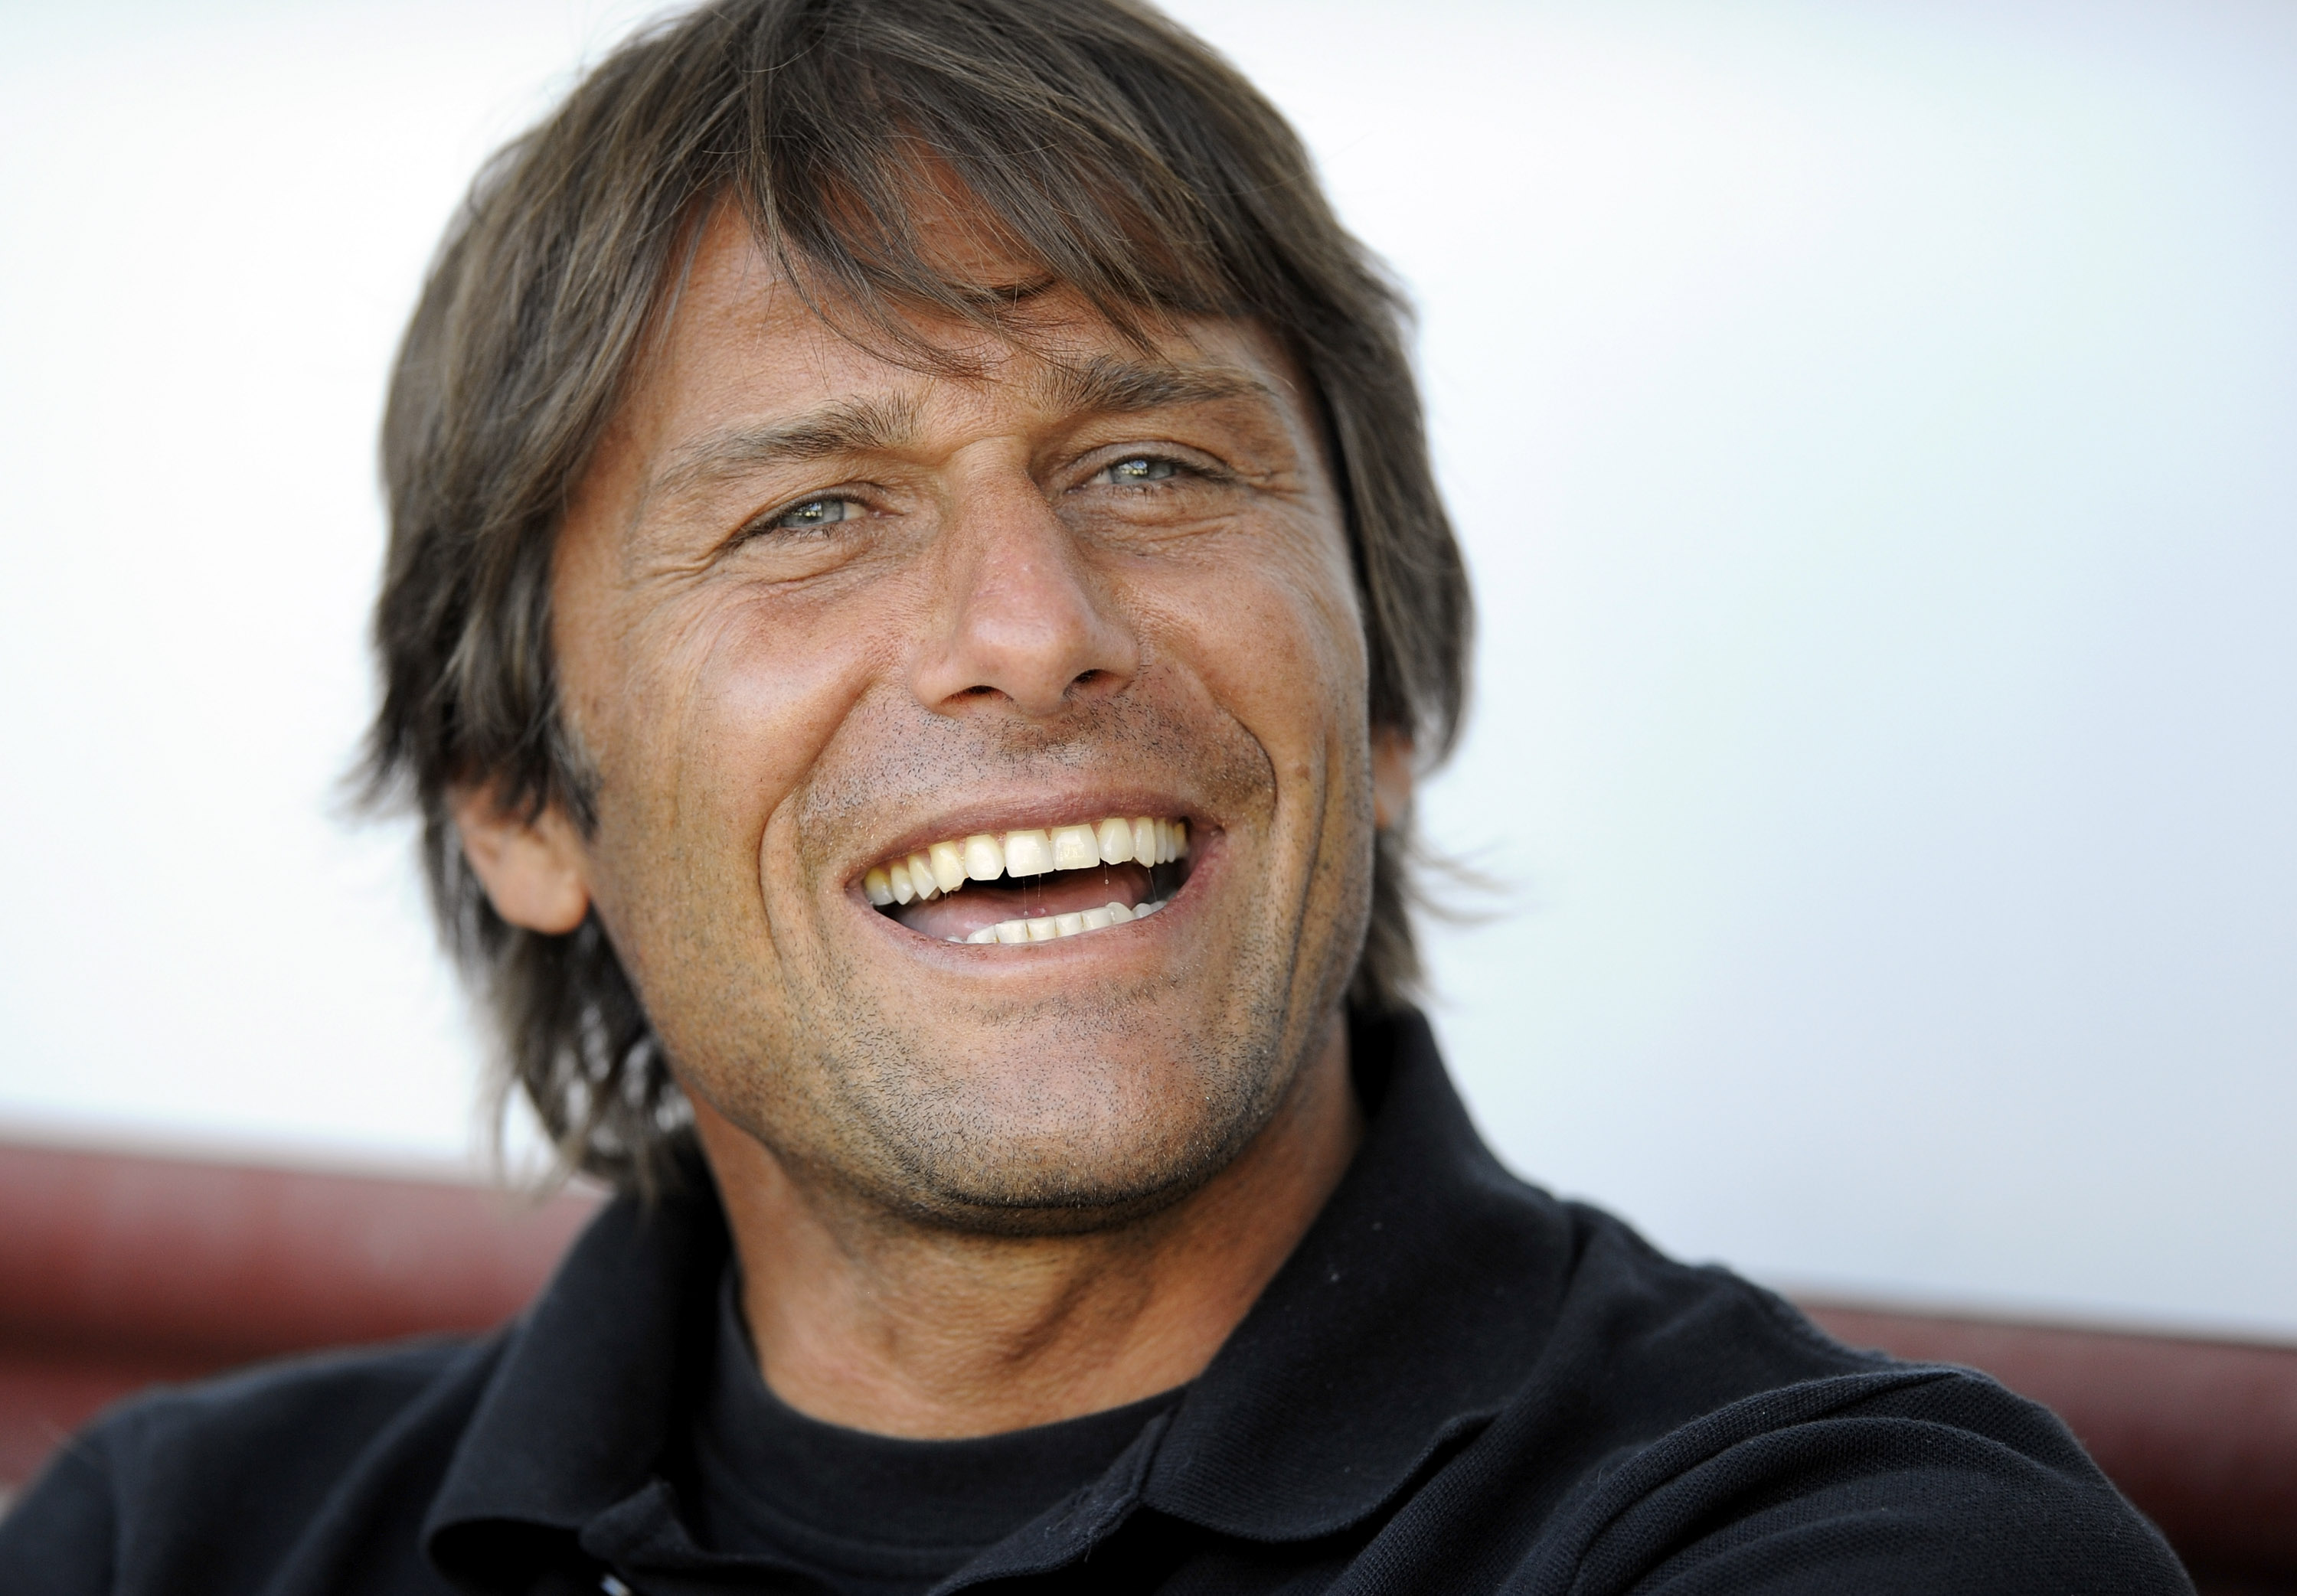 OFFICIAL: Antonio Conte staying with Juventus 